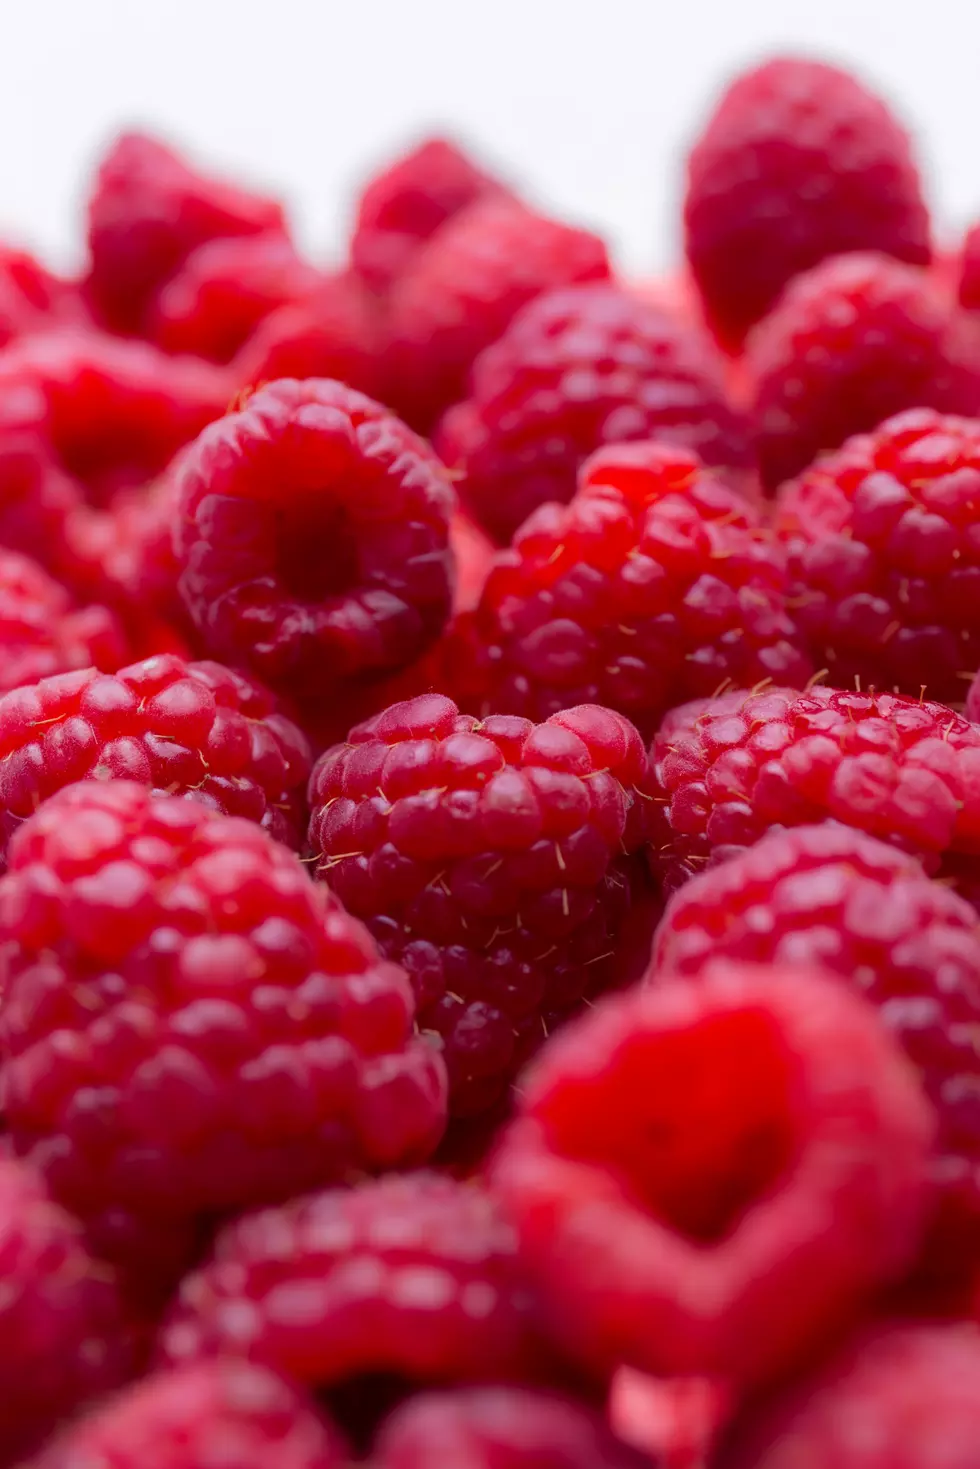 Pick Your Own Raspberries At Happy Day Farm In Manalapan